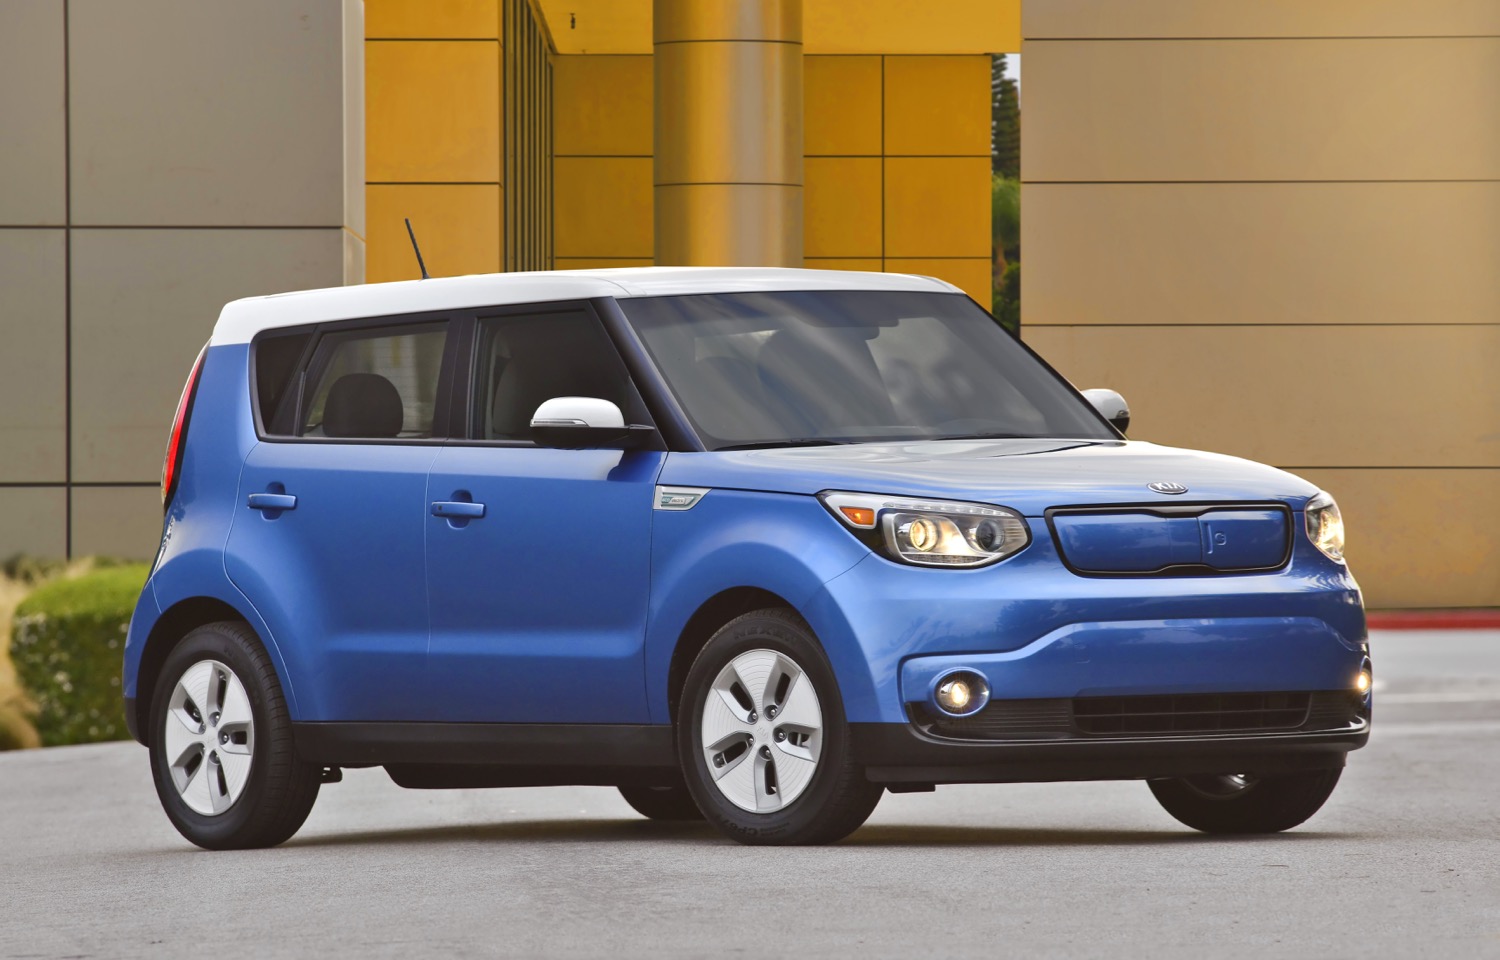 2018 Kia Soul EV to get range boost to keep pace: report